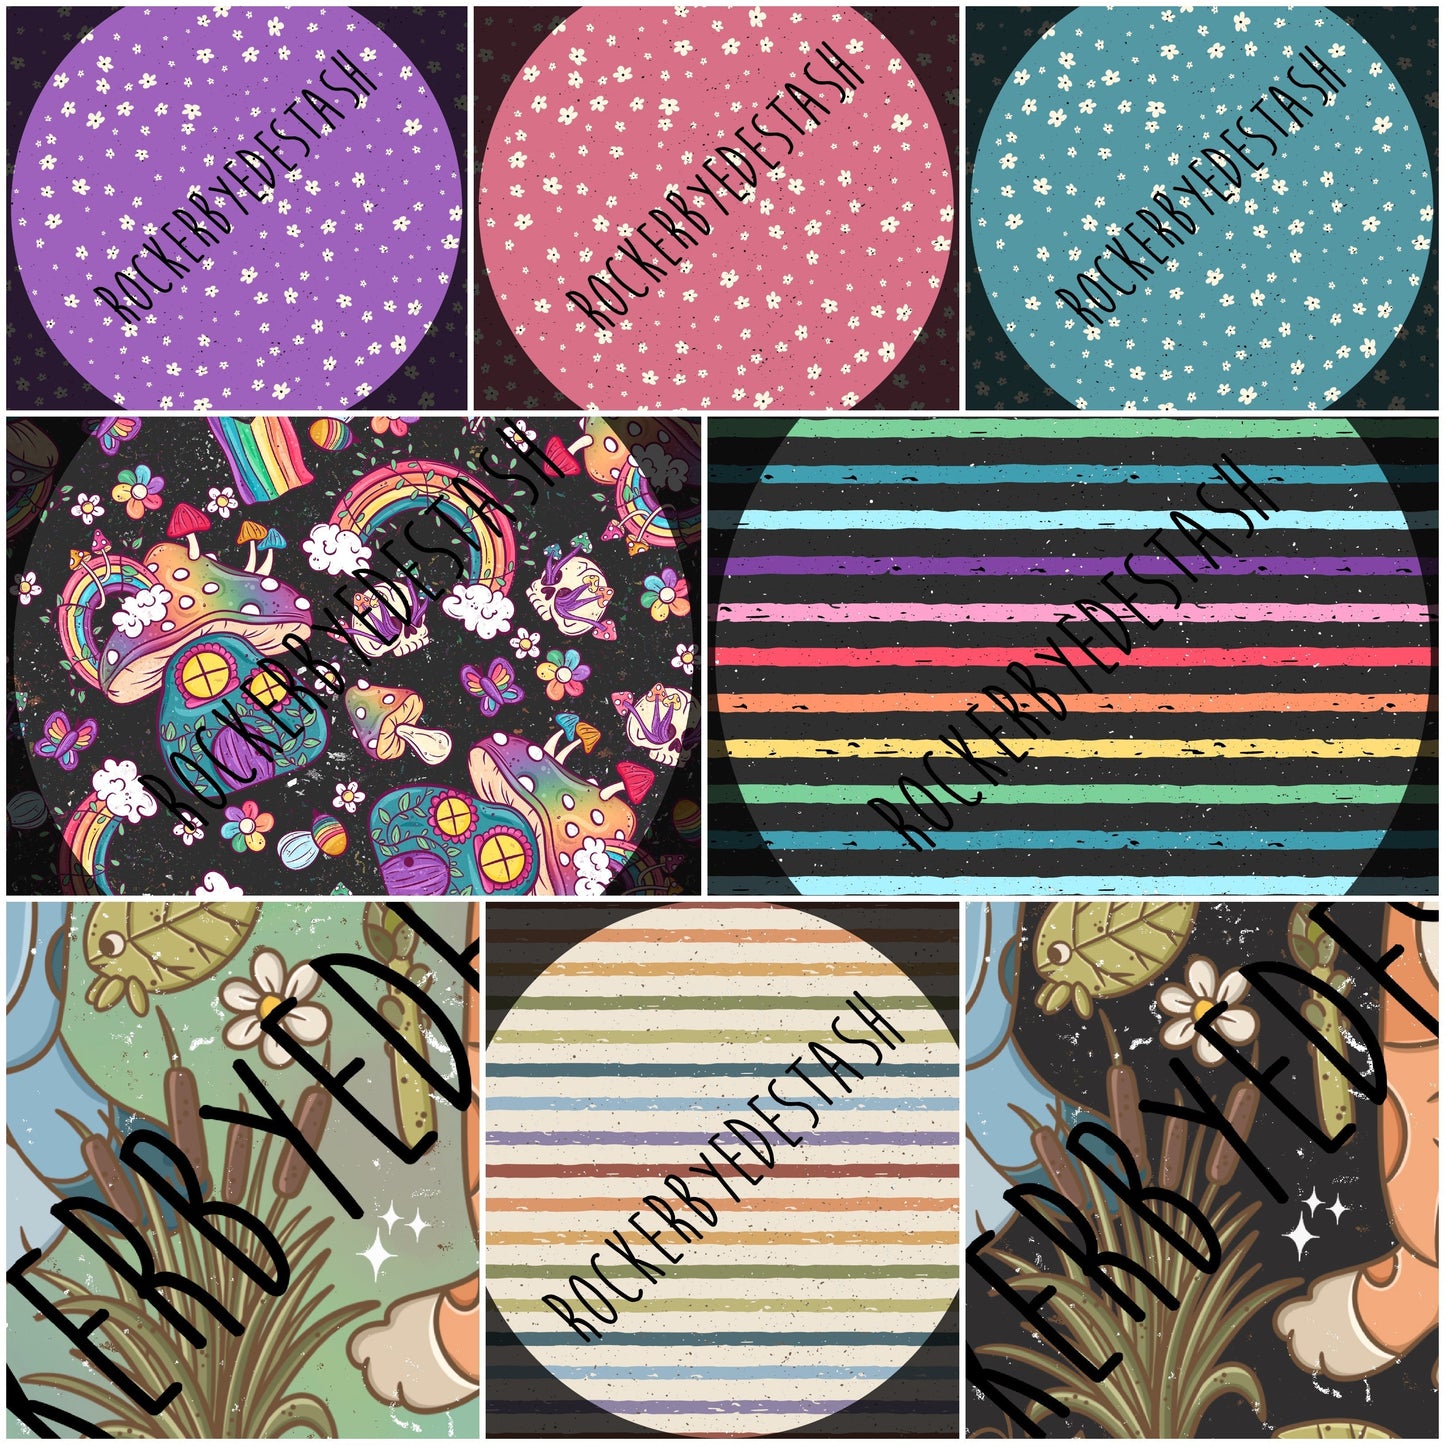 French Terry - PixelCass Collab Retail Round YY - super special flower, pride & cottagecore fabric things inside